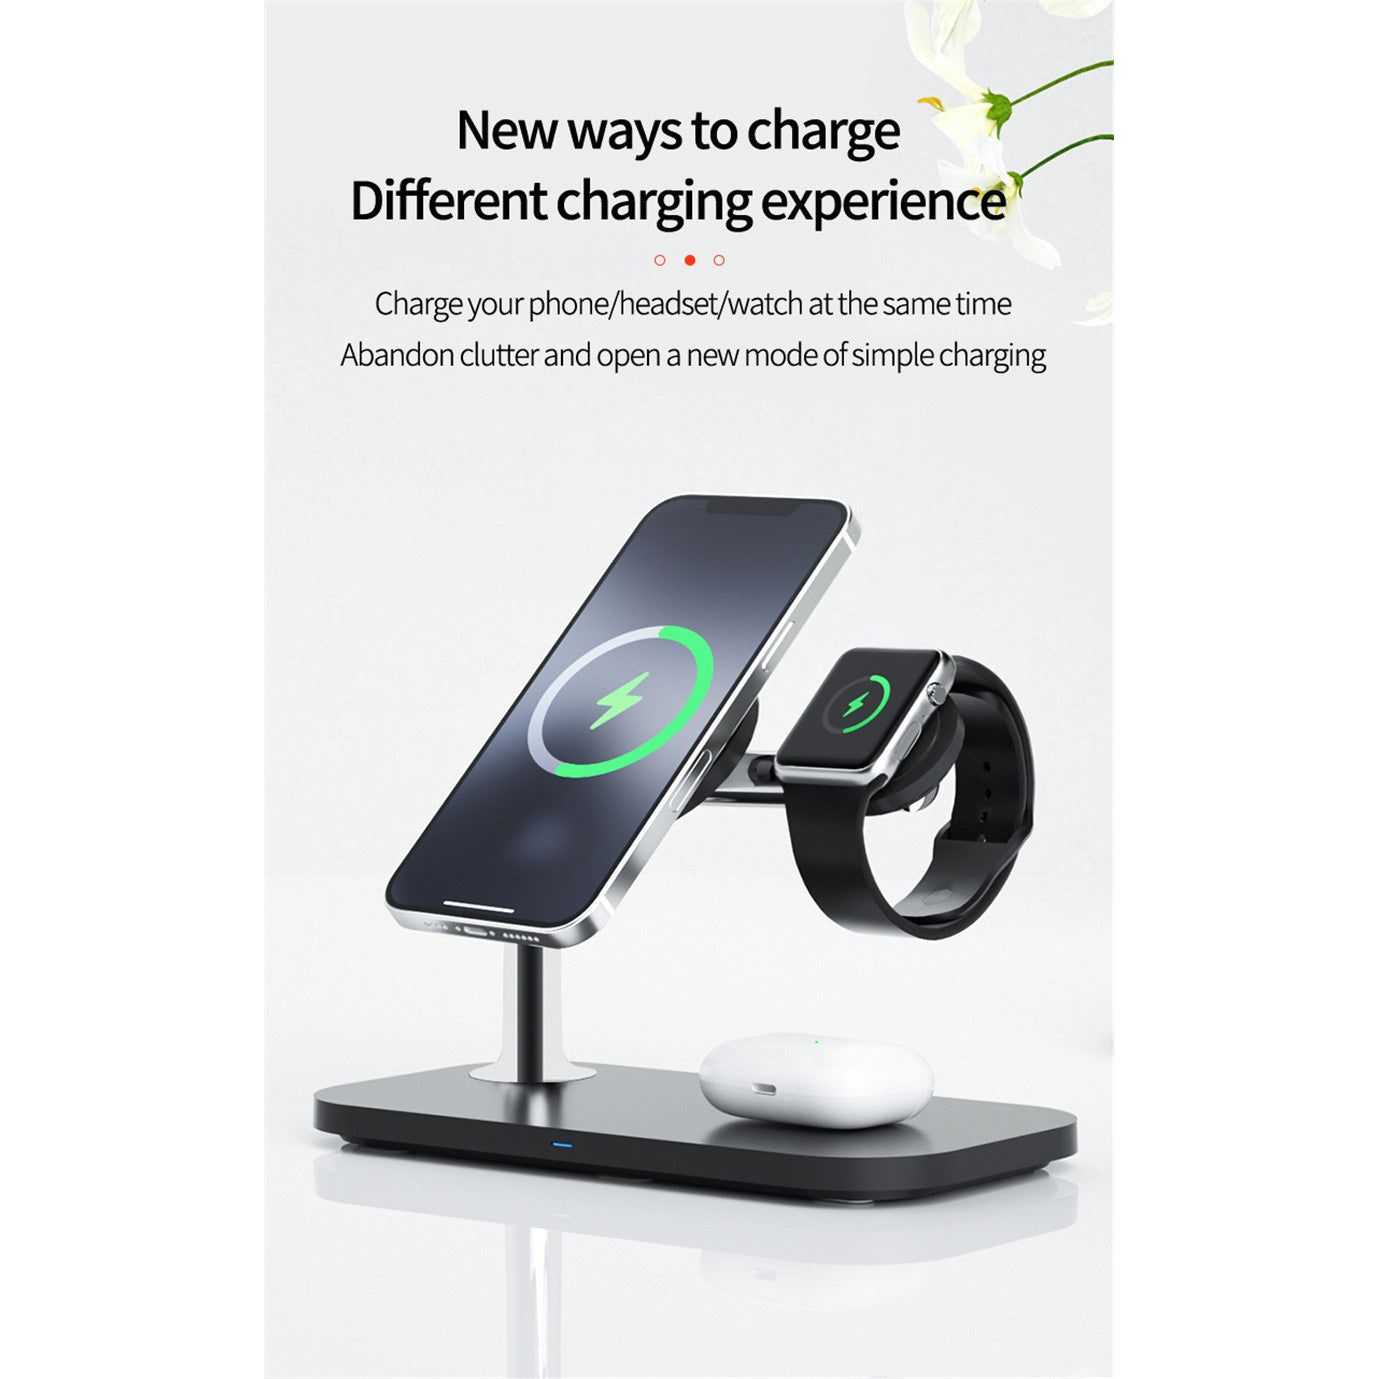 3-in-1 Wireless Charger with MagSafe CompatibilityQuantumX Chargers